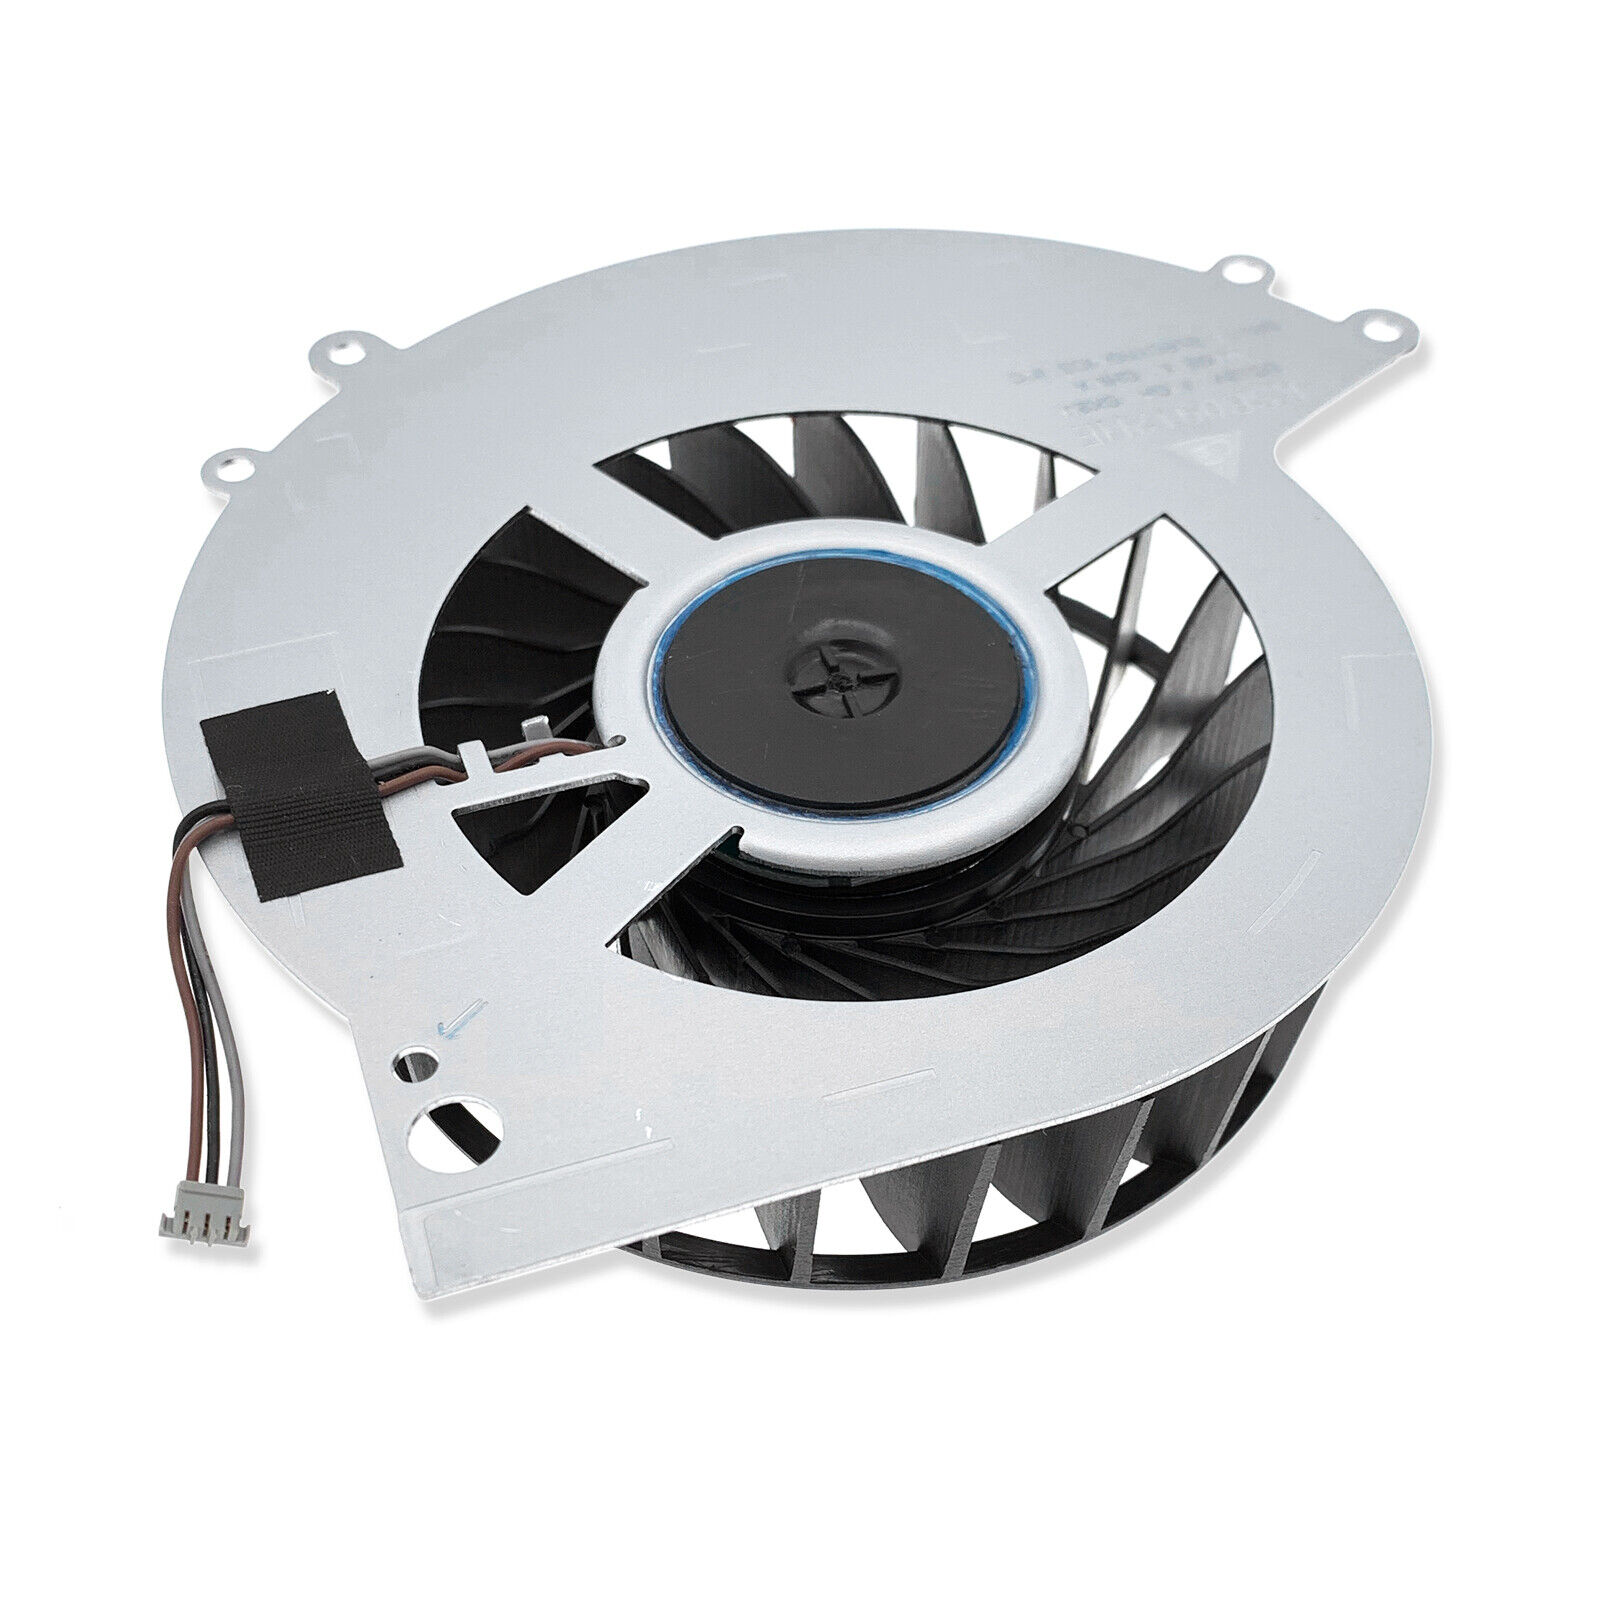 Internal Cooling Fan KSB0912HE for Mail order cheap Sony CUH-1003A PS4 San Jose Mall CUH-1004A